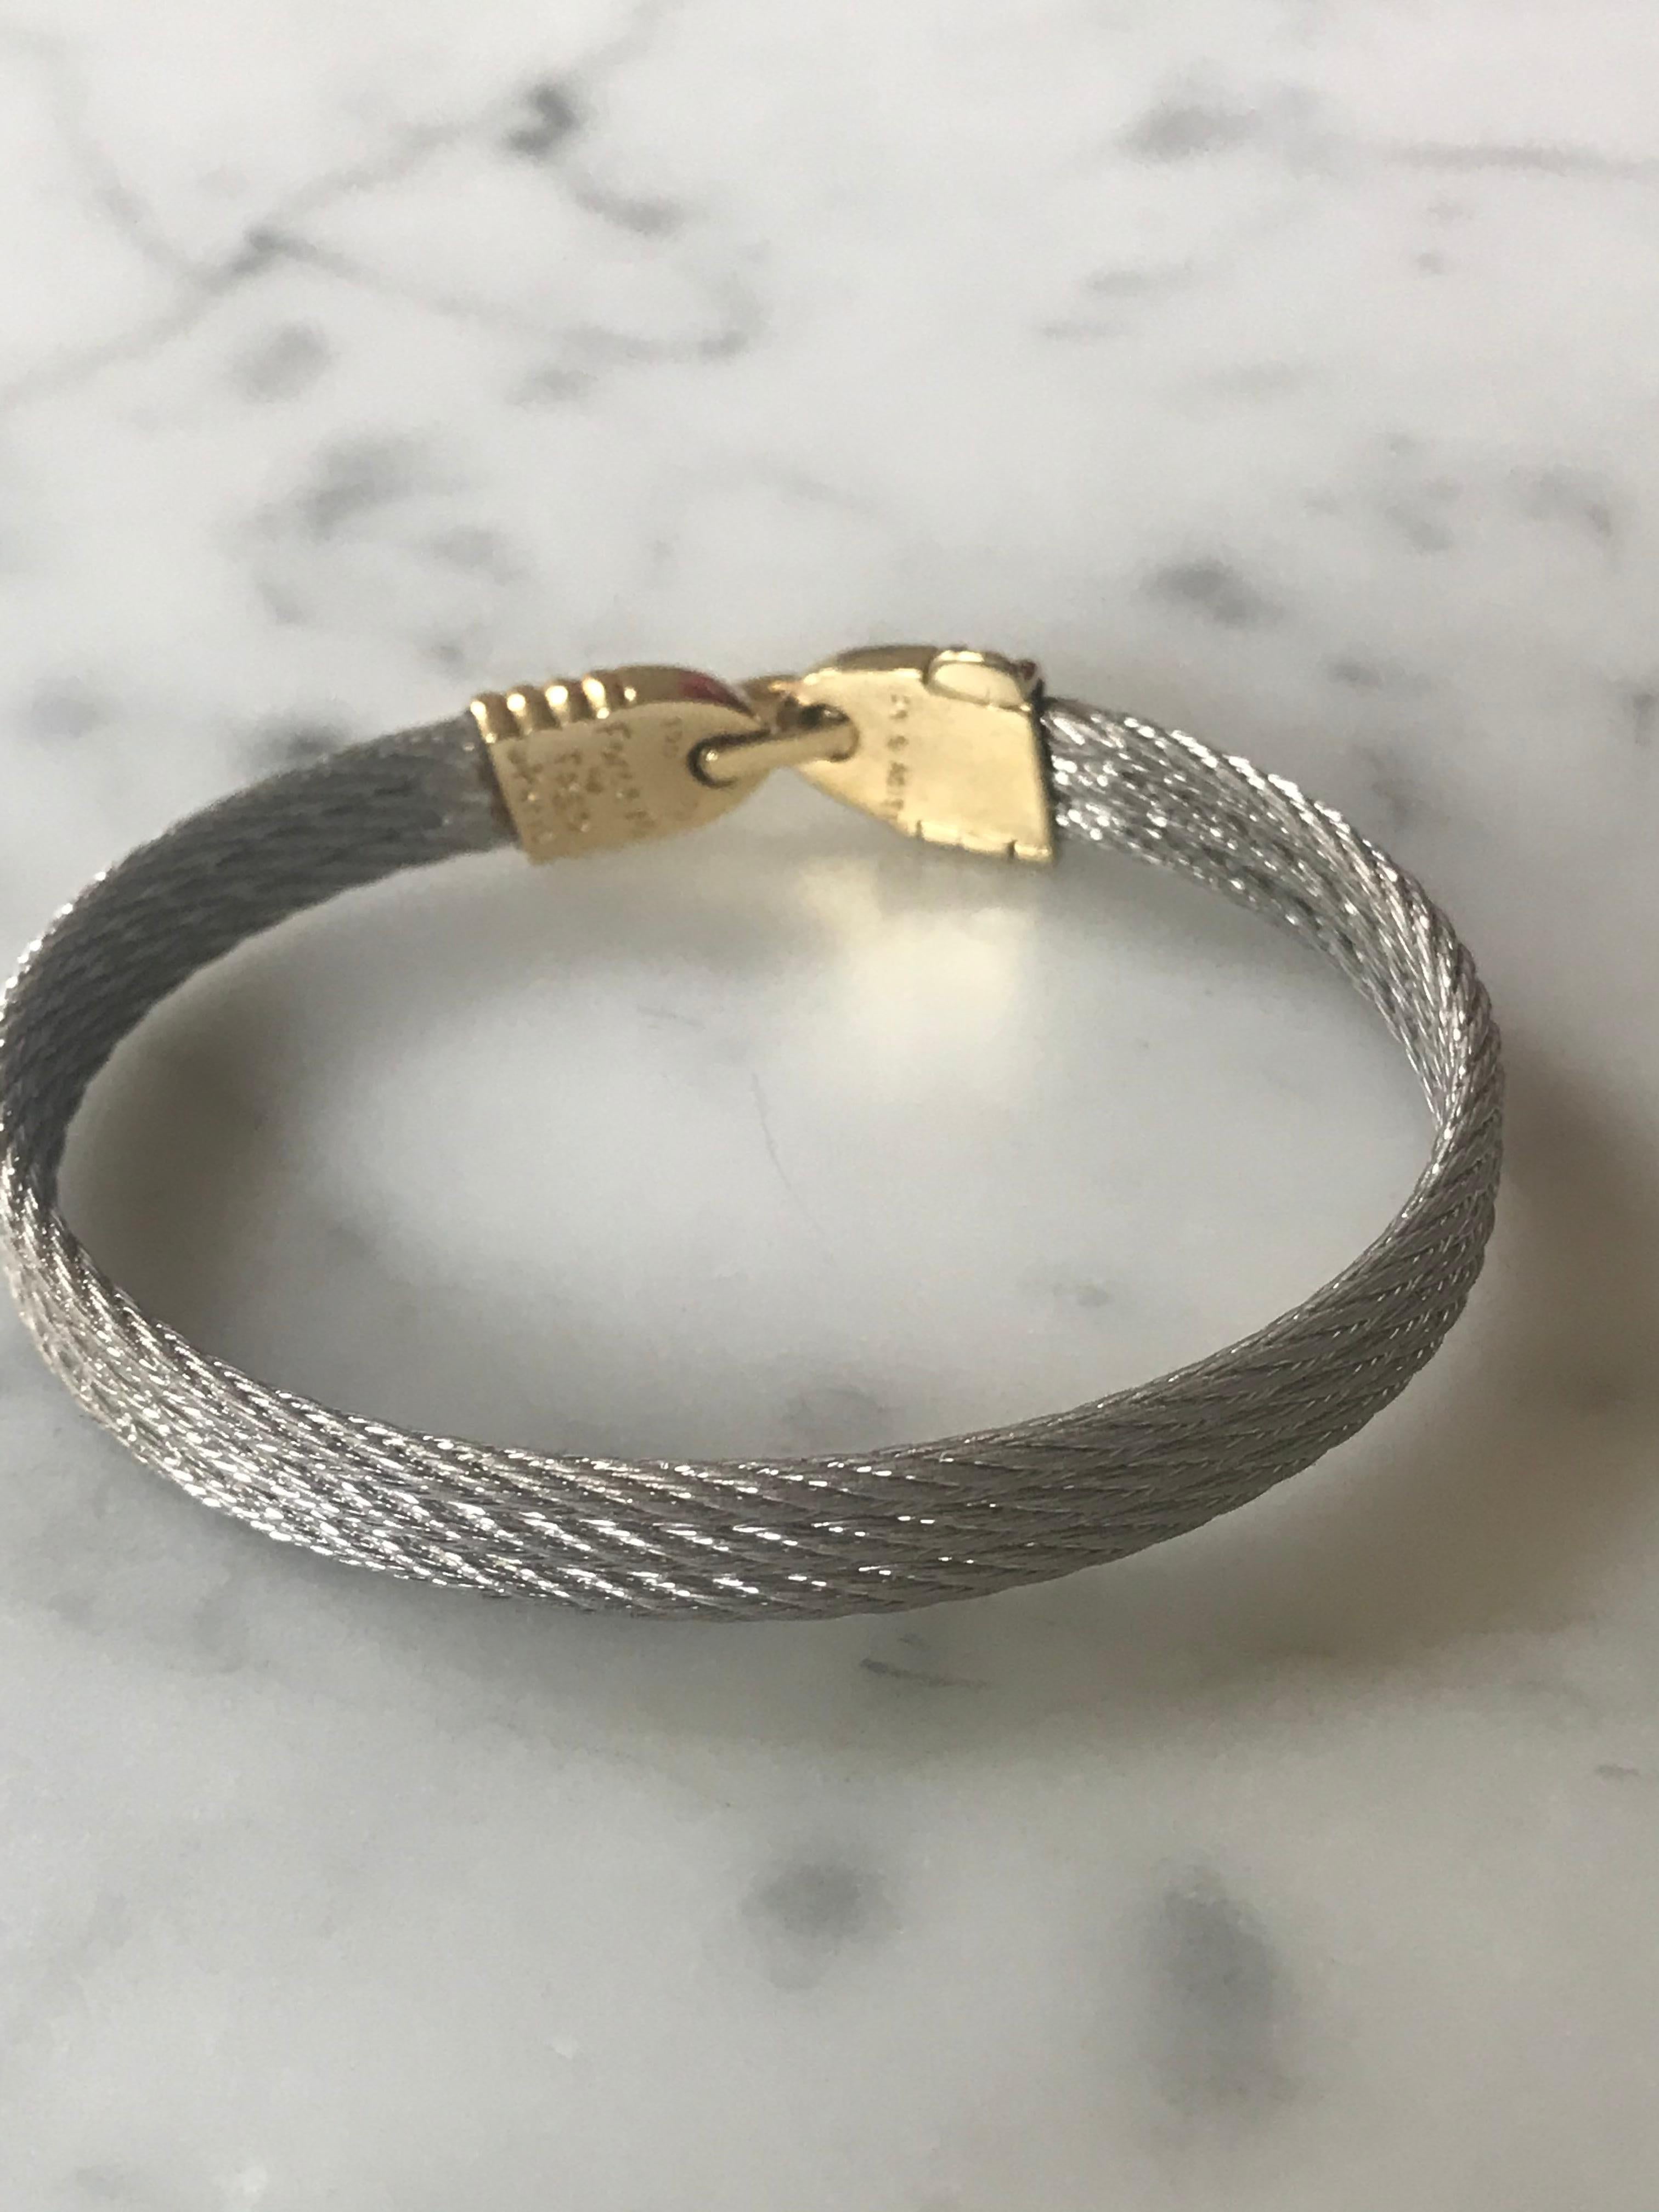 Fred Paris Force 10 Sailing Bracelet in Steel and 18 Karat Yellow Gold,  France